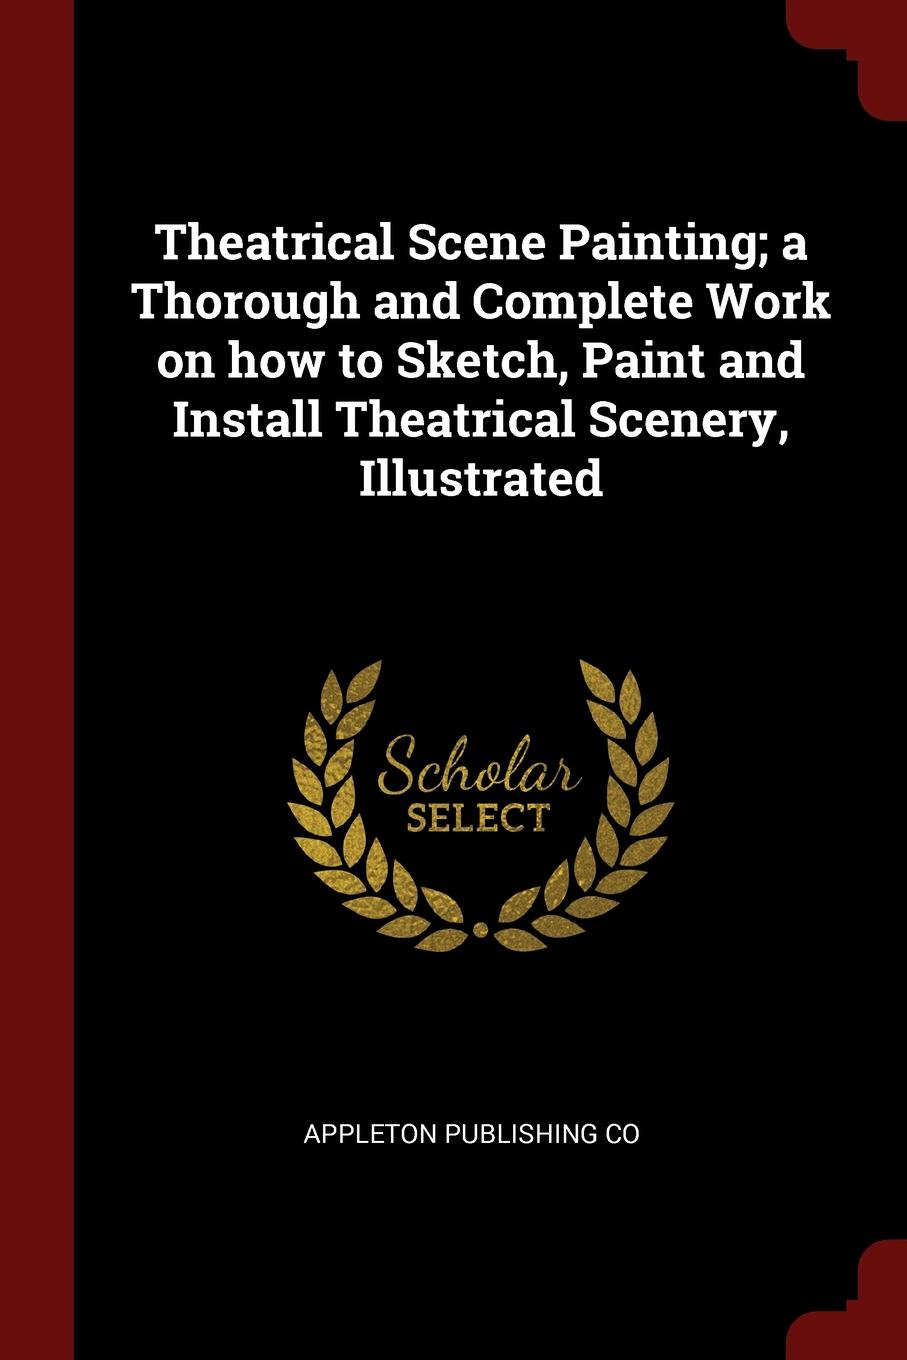 Theatrical Scene Painting; a Thorough and Complete Work on how to Sketch, Paint and Install Theatrical Scenery, Illustrated